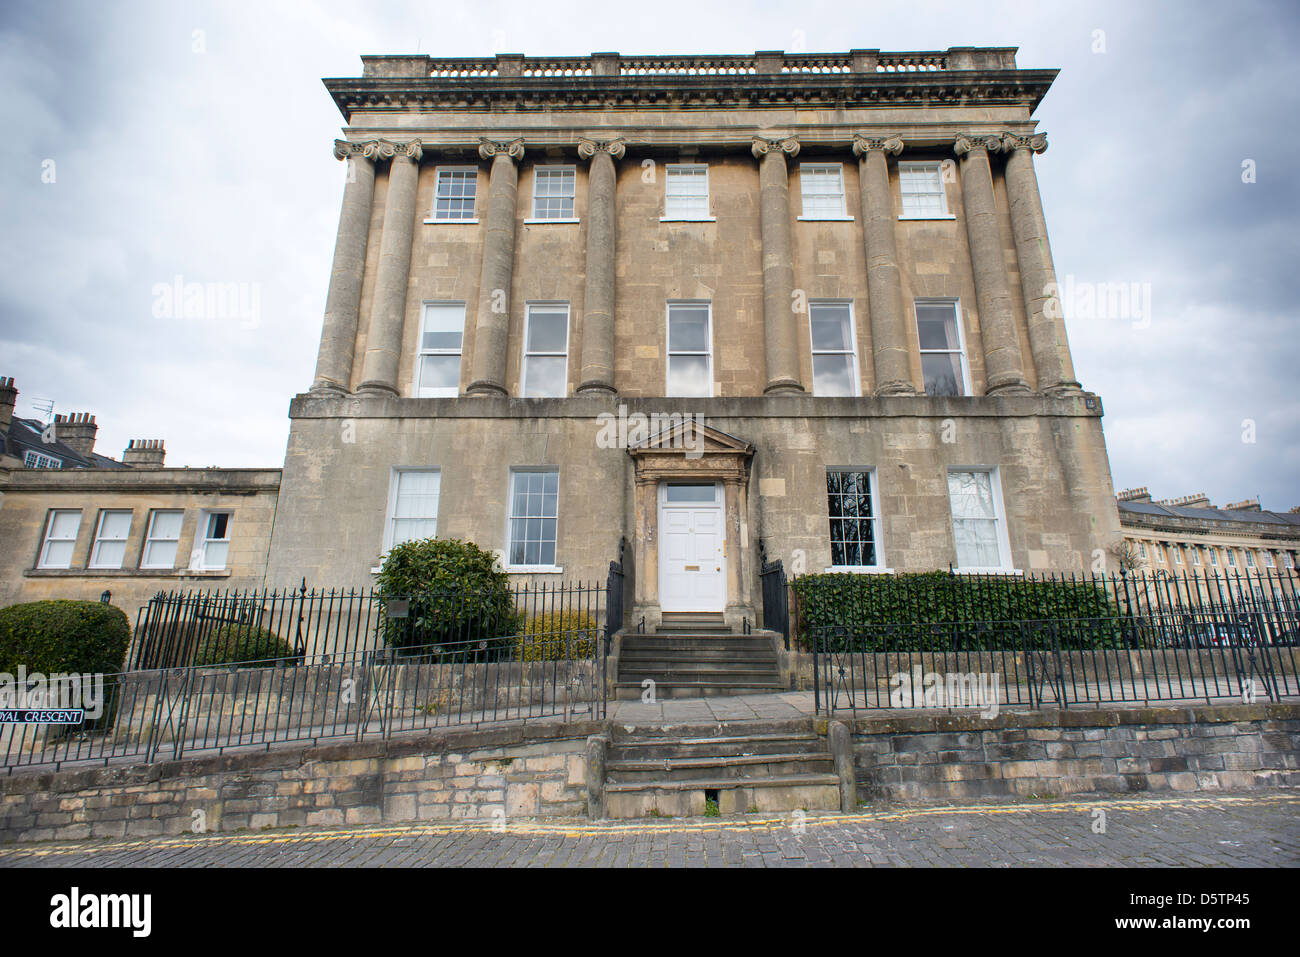 Il Royal Crescent in bagno, Somerset, Inghilterra. Foto Stock